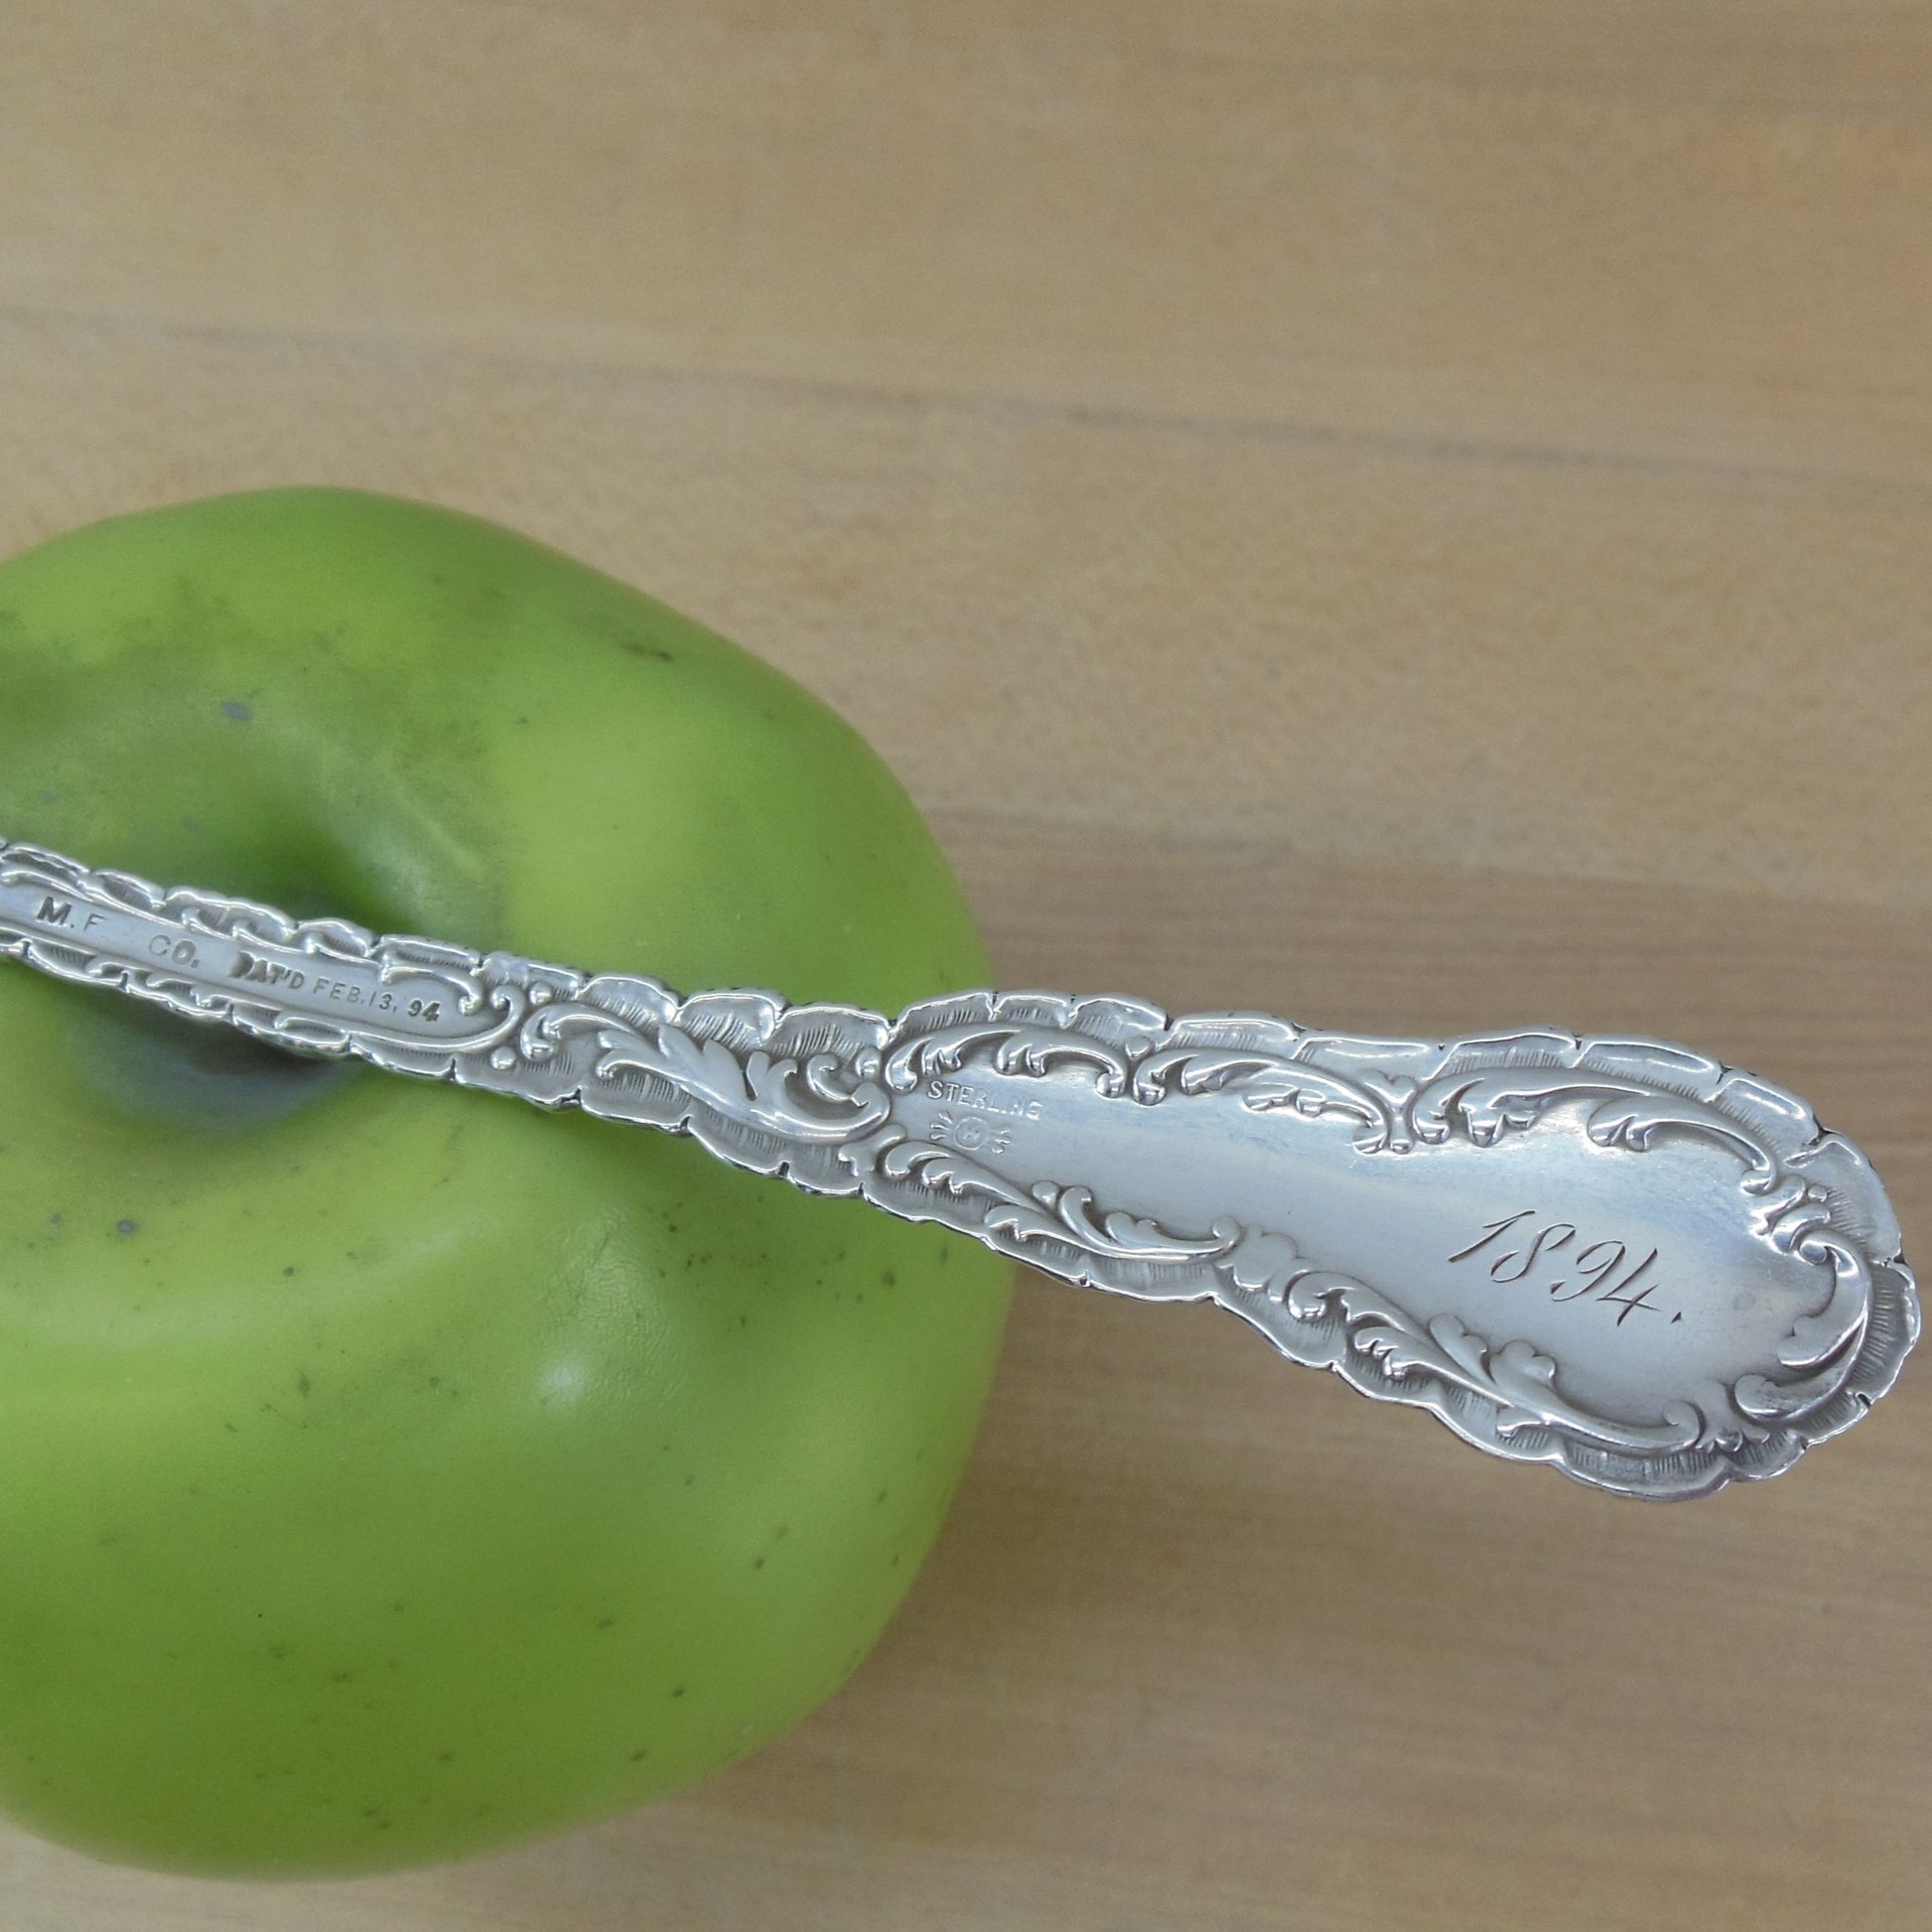 Frank Whiting 1894 Damascus Sterling Silver Teaspoon Engraved "Mary" Marshall Fields